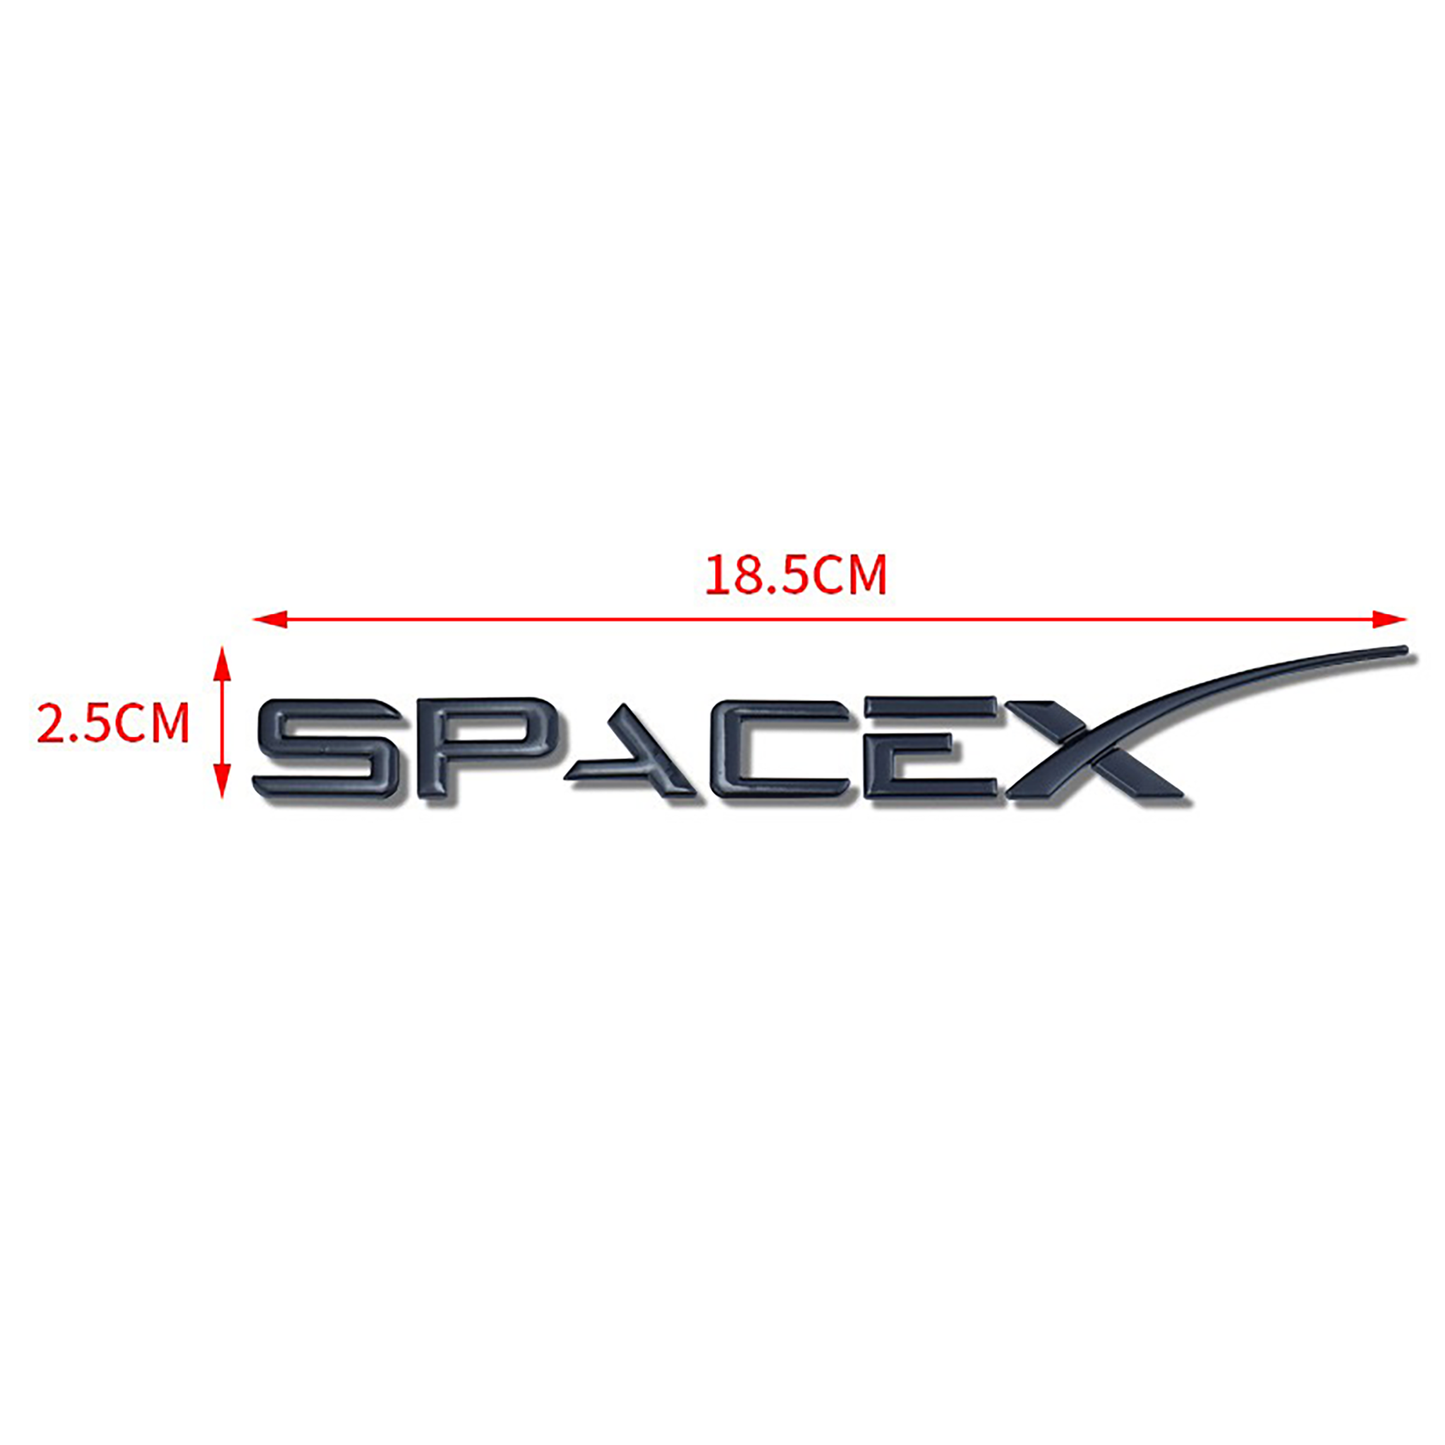 SpaceX Emblems For Tesla Model S3XY